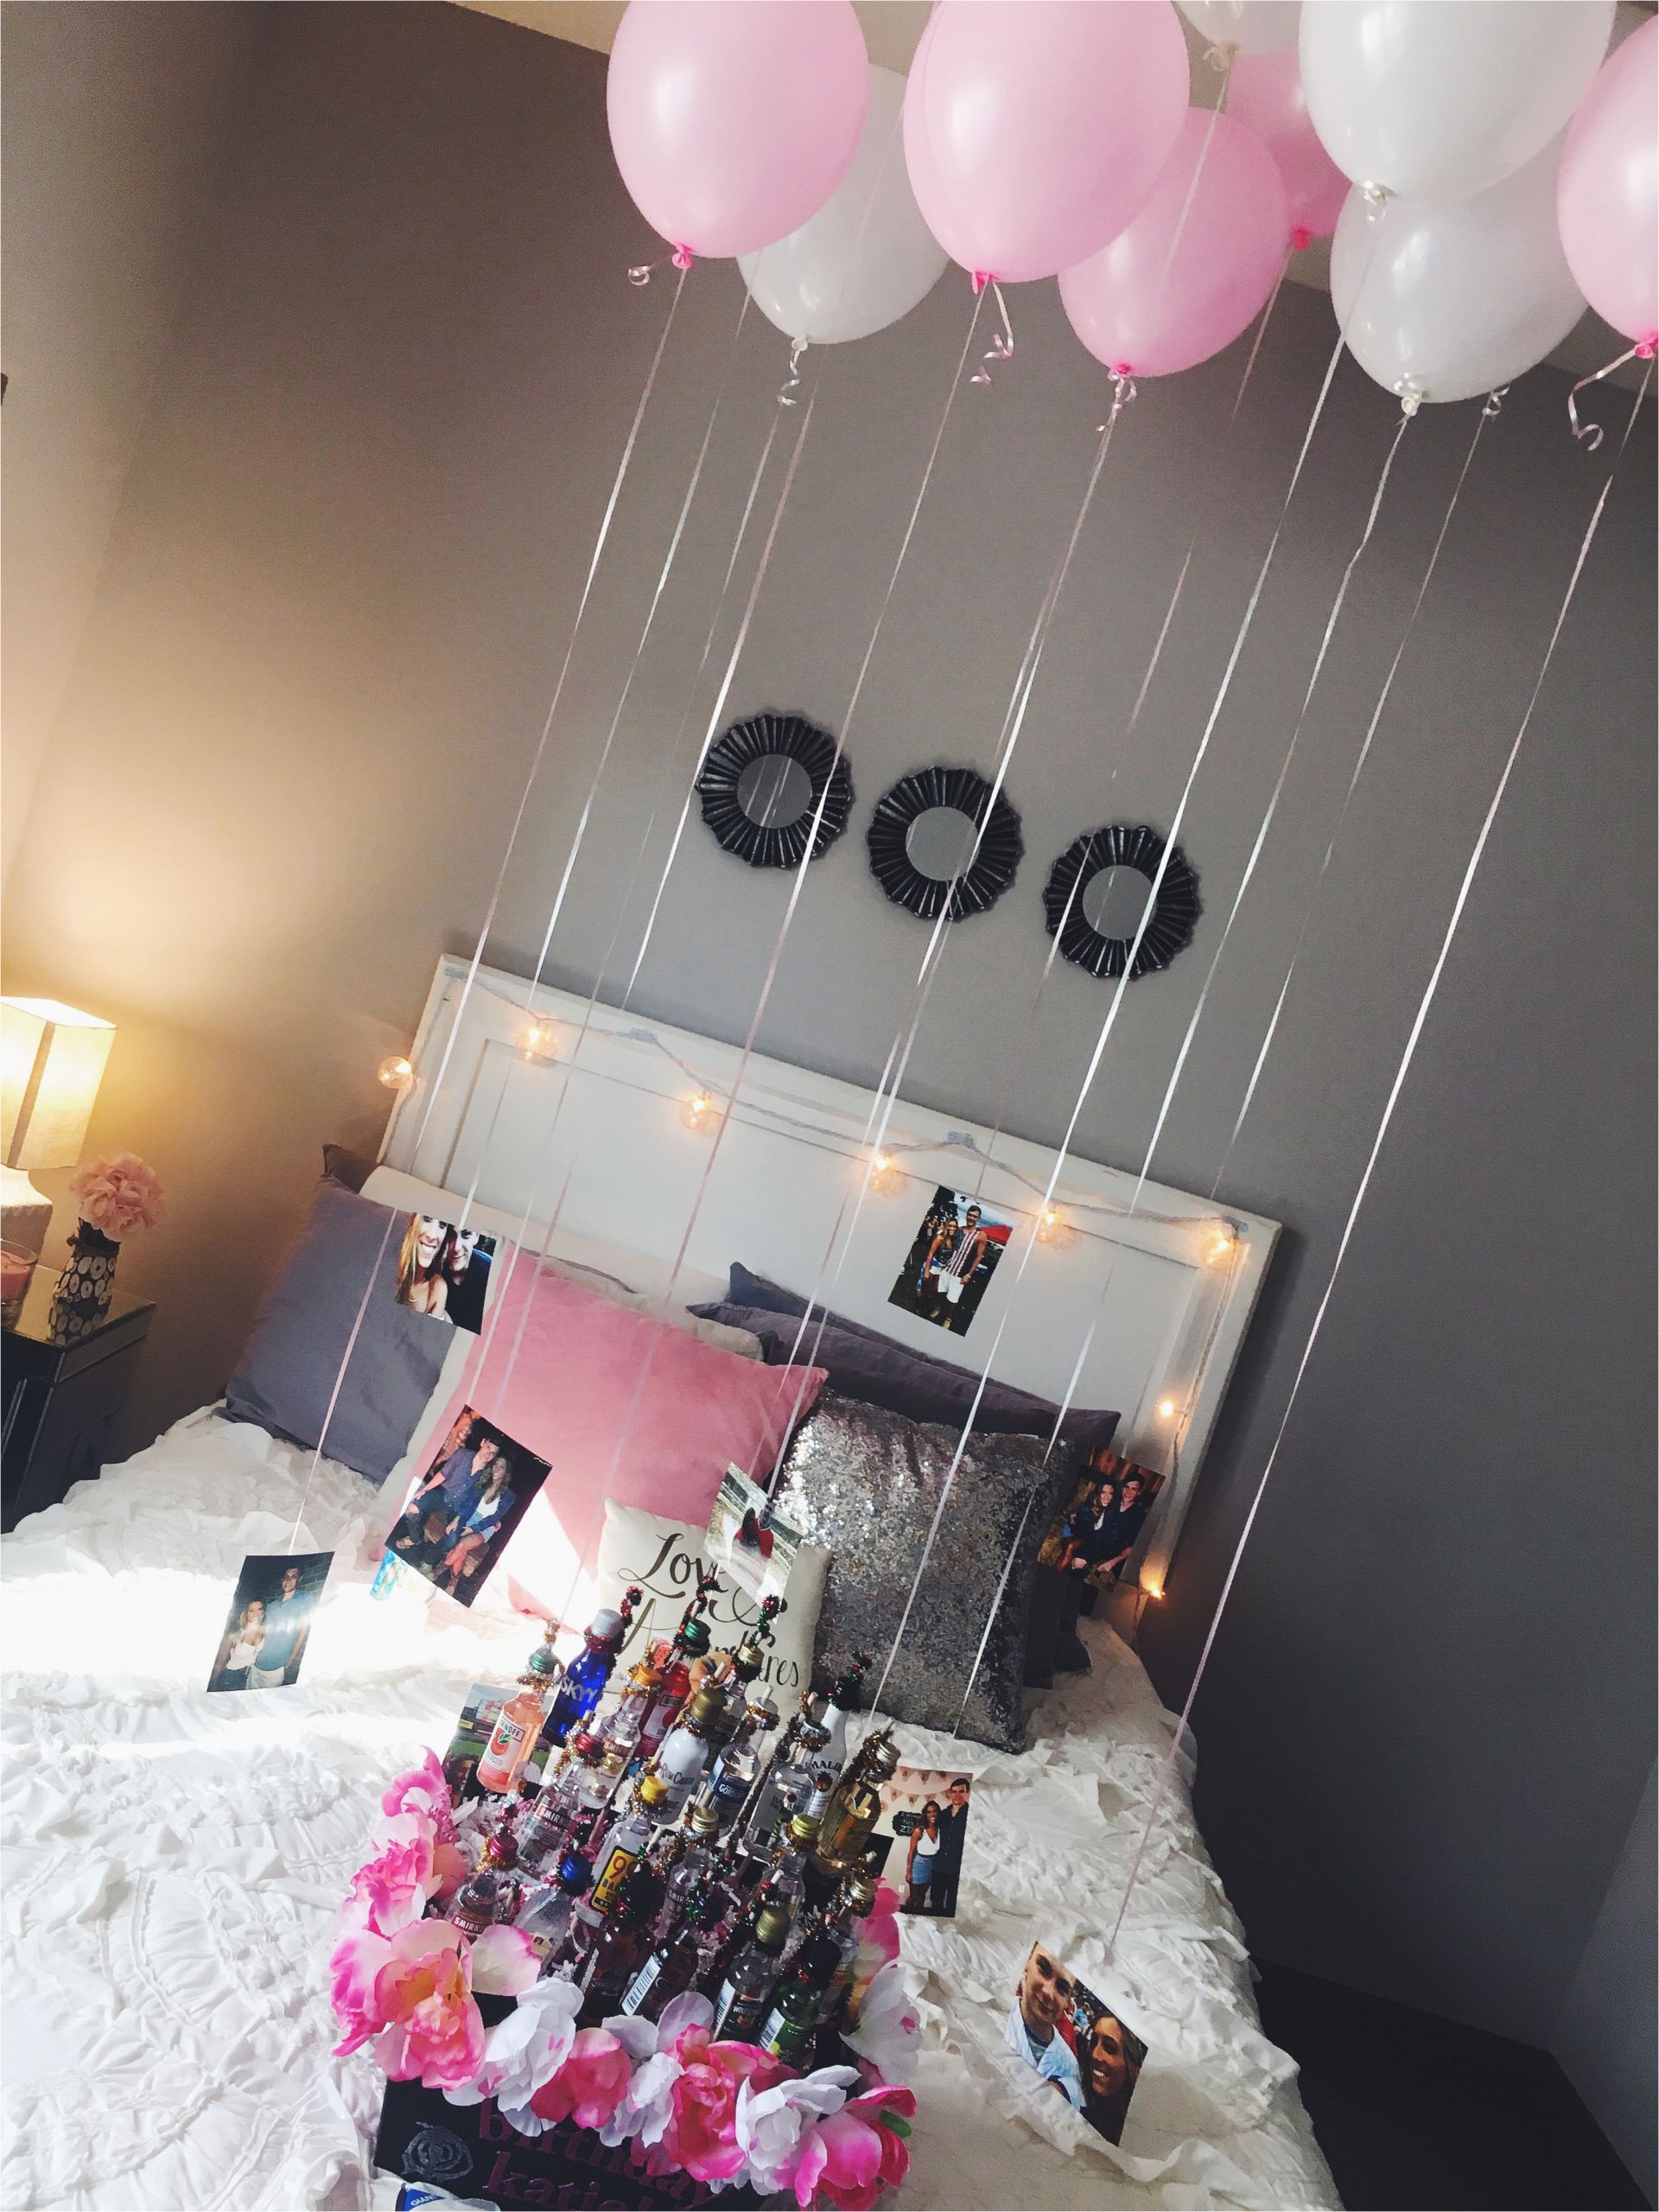 Special 21st Birthday Gifts for Boyfriend Easy and Cute Decorations for A Friend or Girlfriends 21st